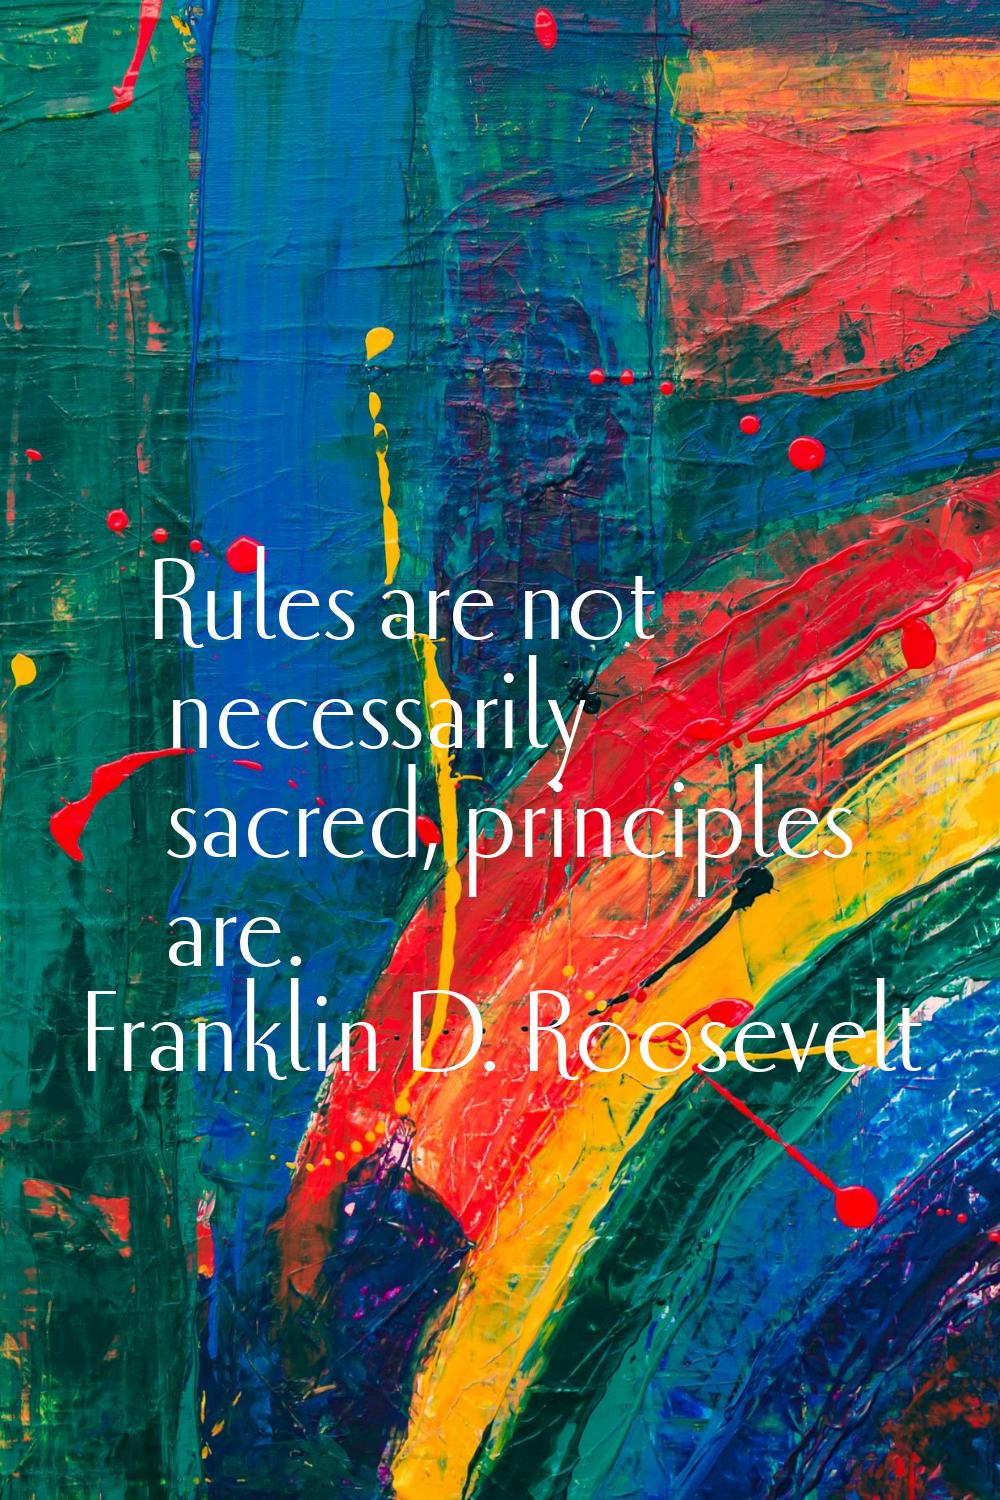 Rules are not necessarily sacred, principles are.